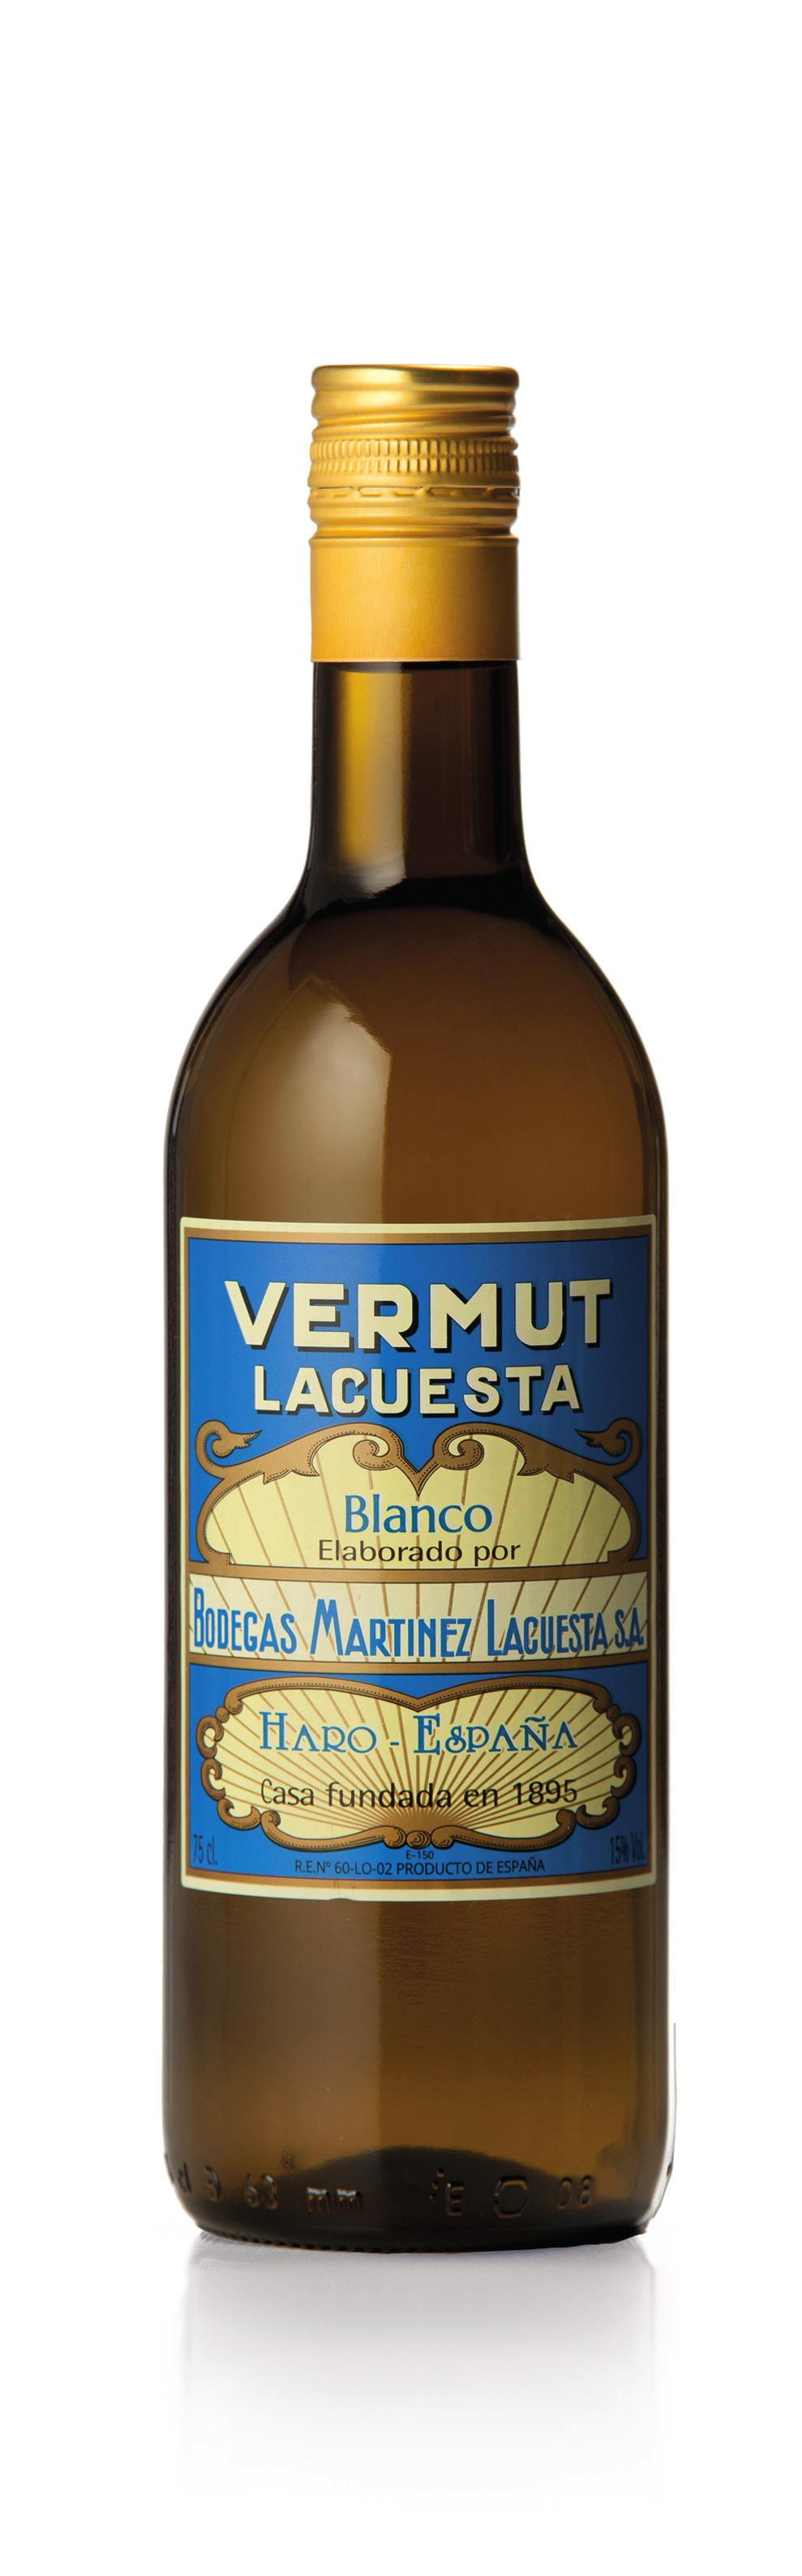 B O D E G A S HARO RIOJA 1895 VERMUT LACUESTA BLANCO Twenty plants and herbs are used in preparing this white vermut. Pale yellow colour.